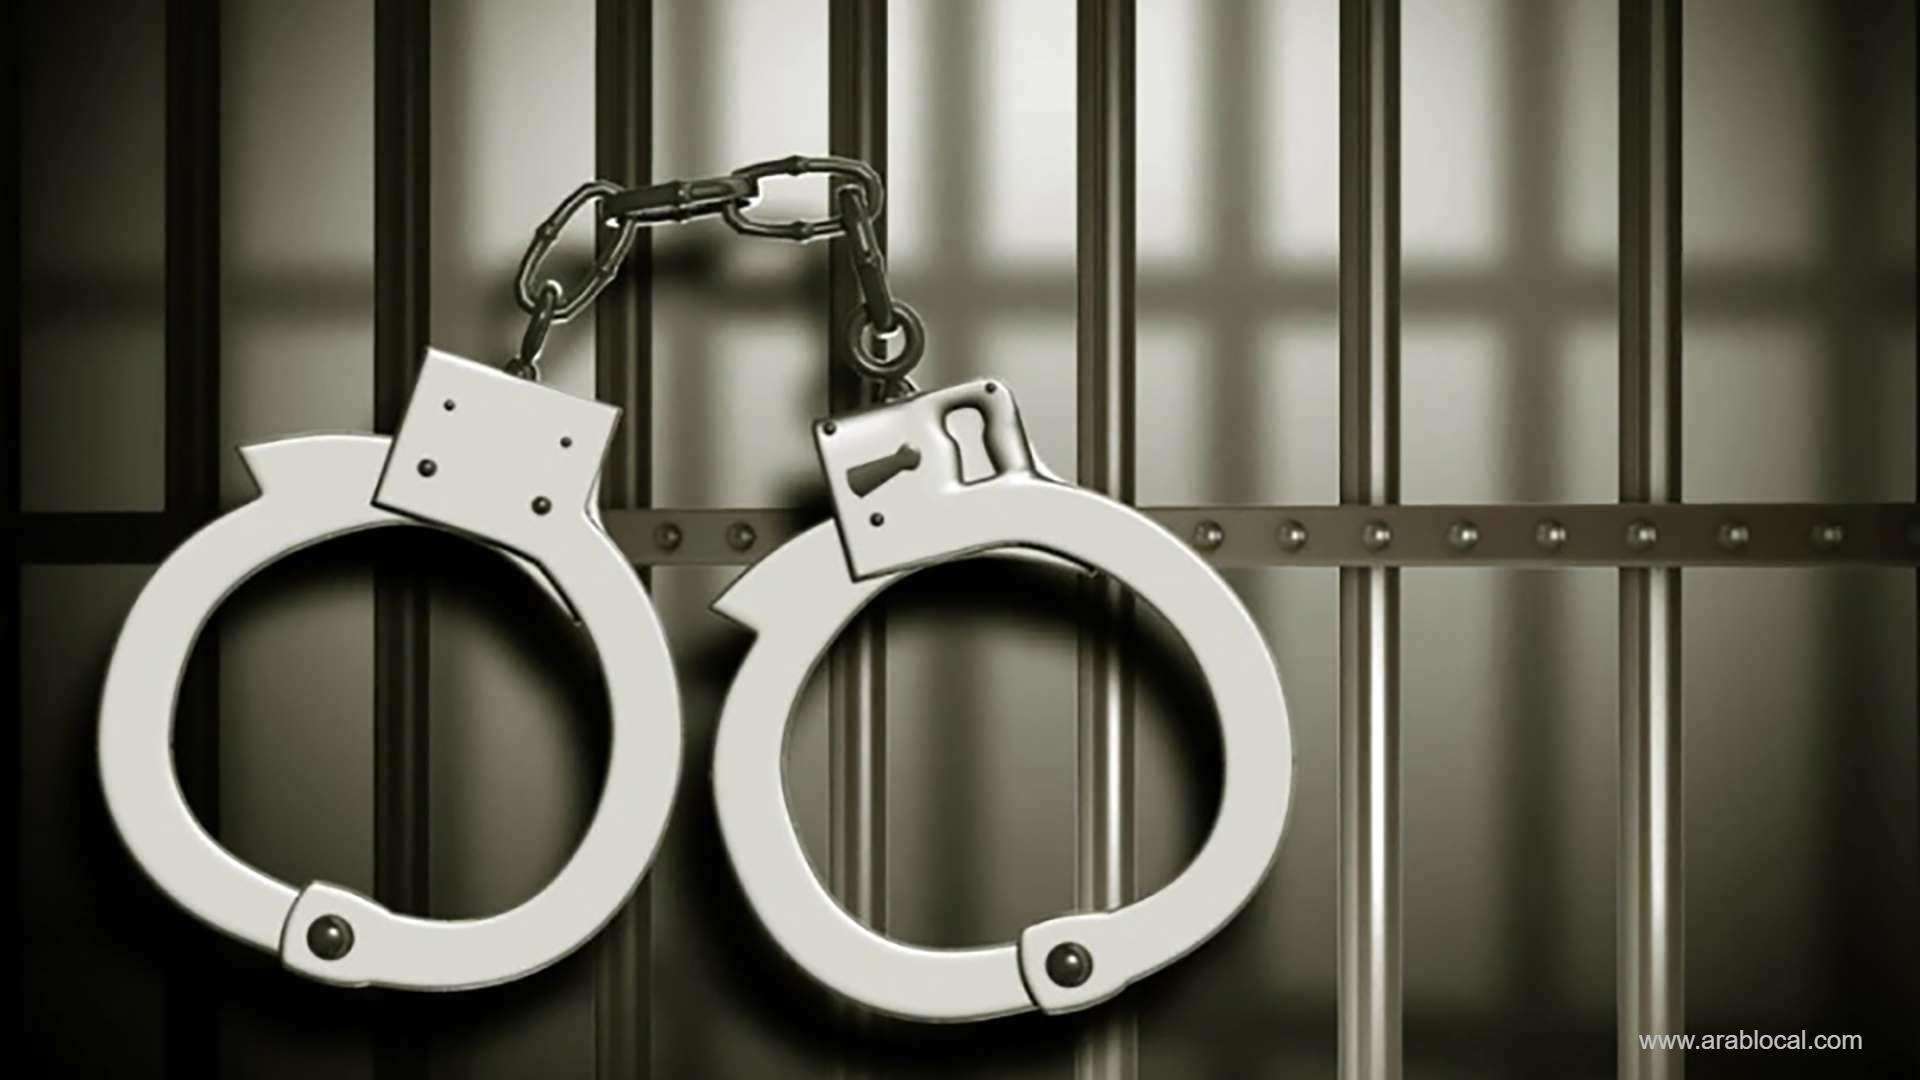 three-expats-arrested-in-makkah-for-posing-as-security-men-in-jeddah-saudi